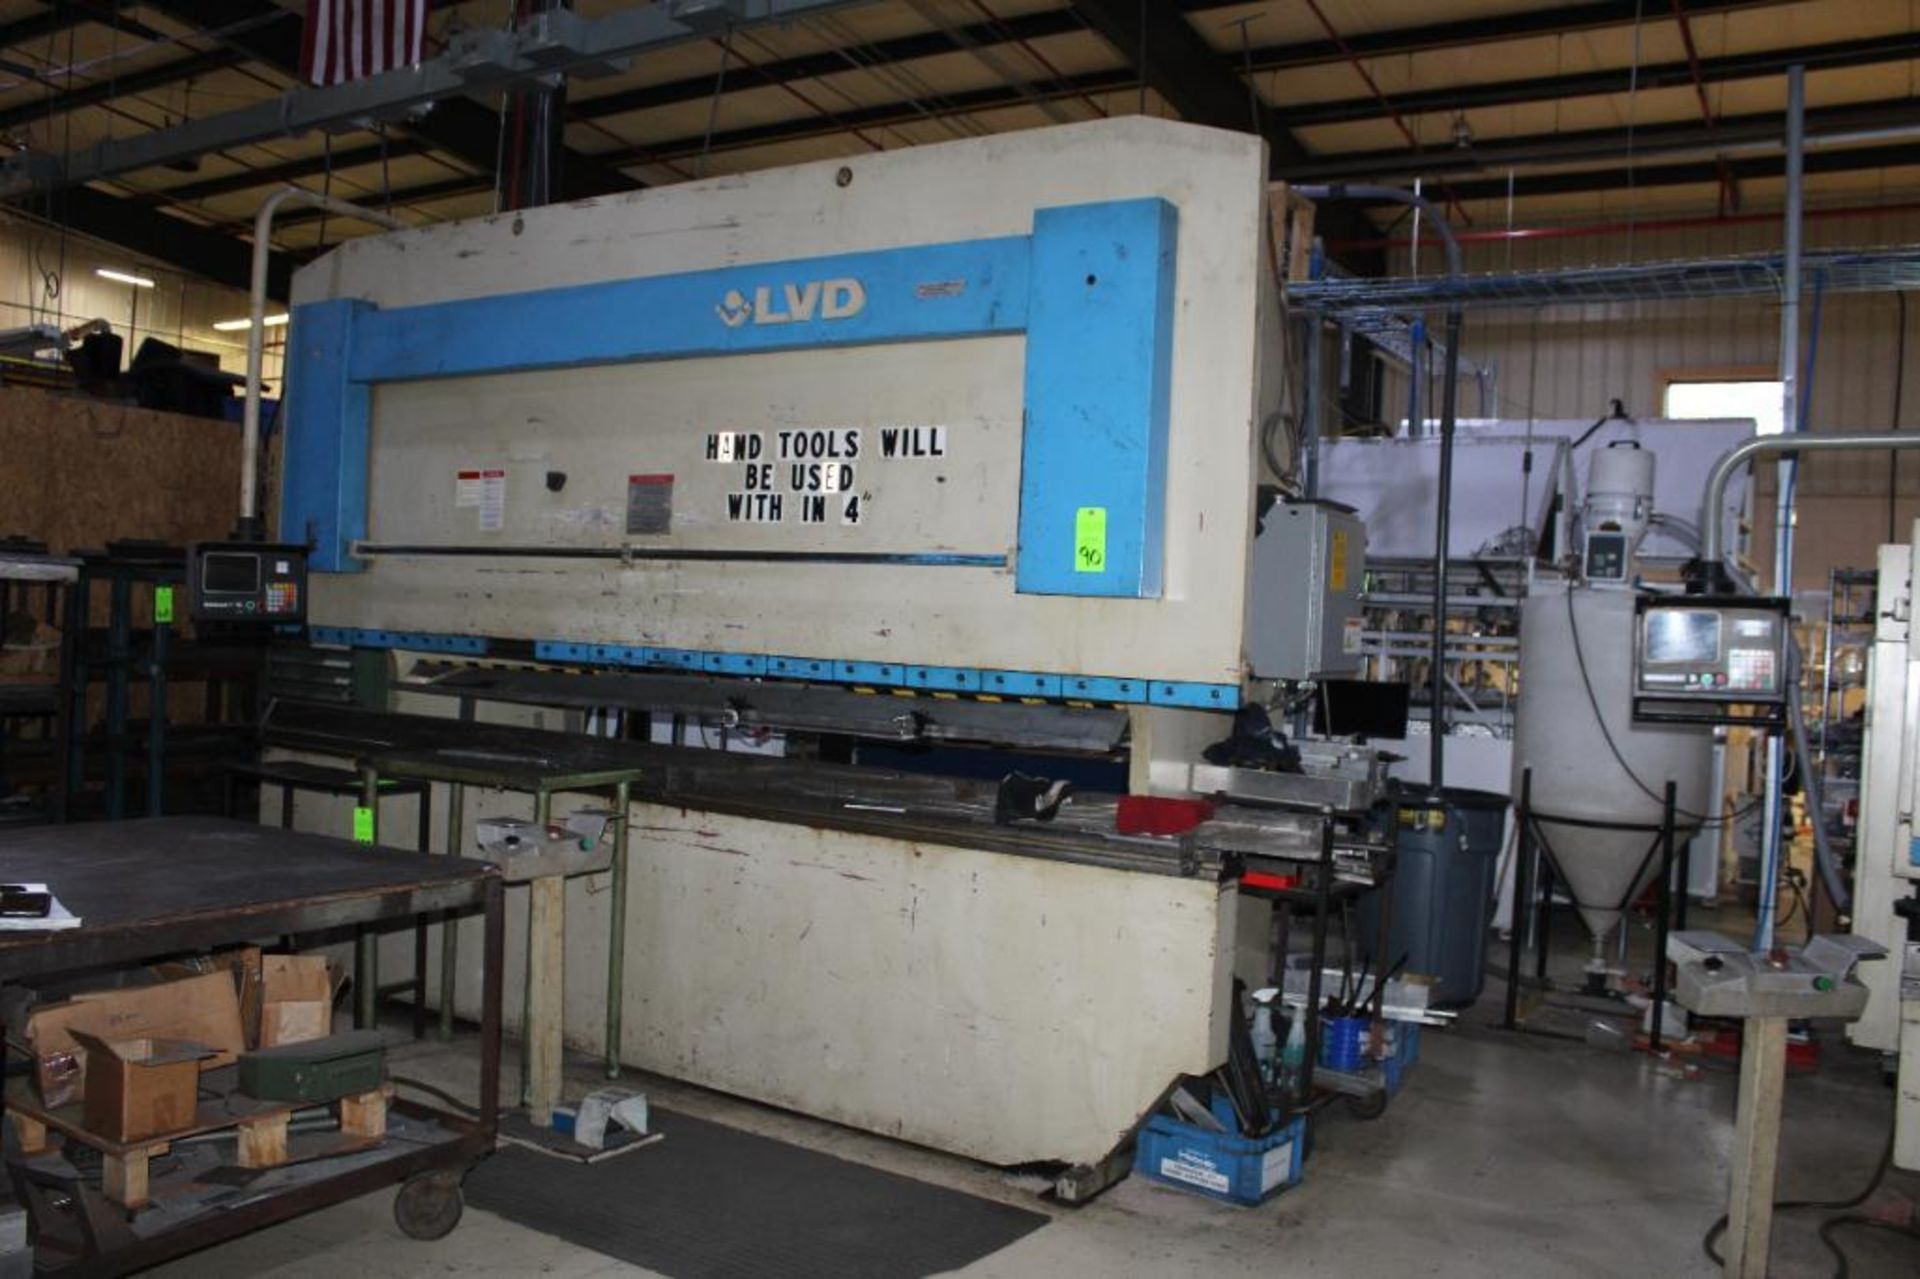 1995 LVD Hydraulic Press Brake Model 180JS13 Equipped With Hurco AutoBend 7 CNC Back Gage